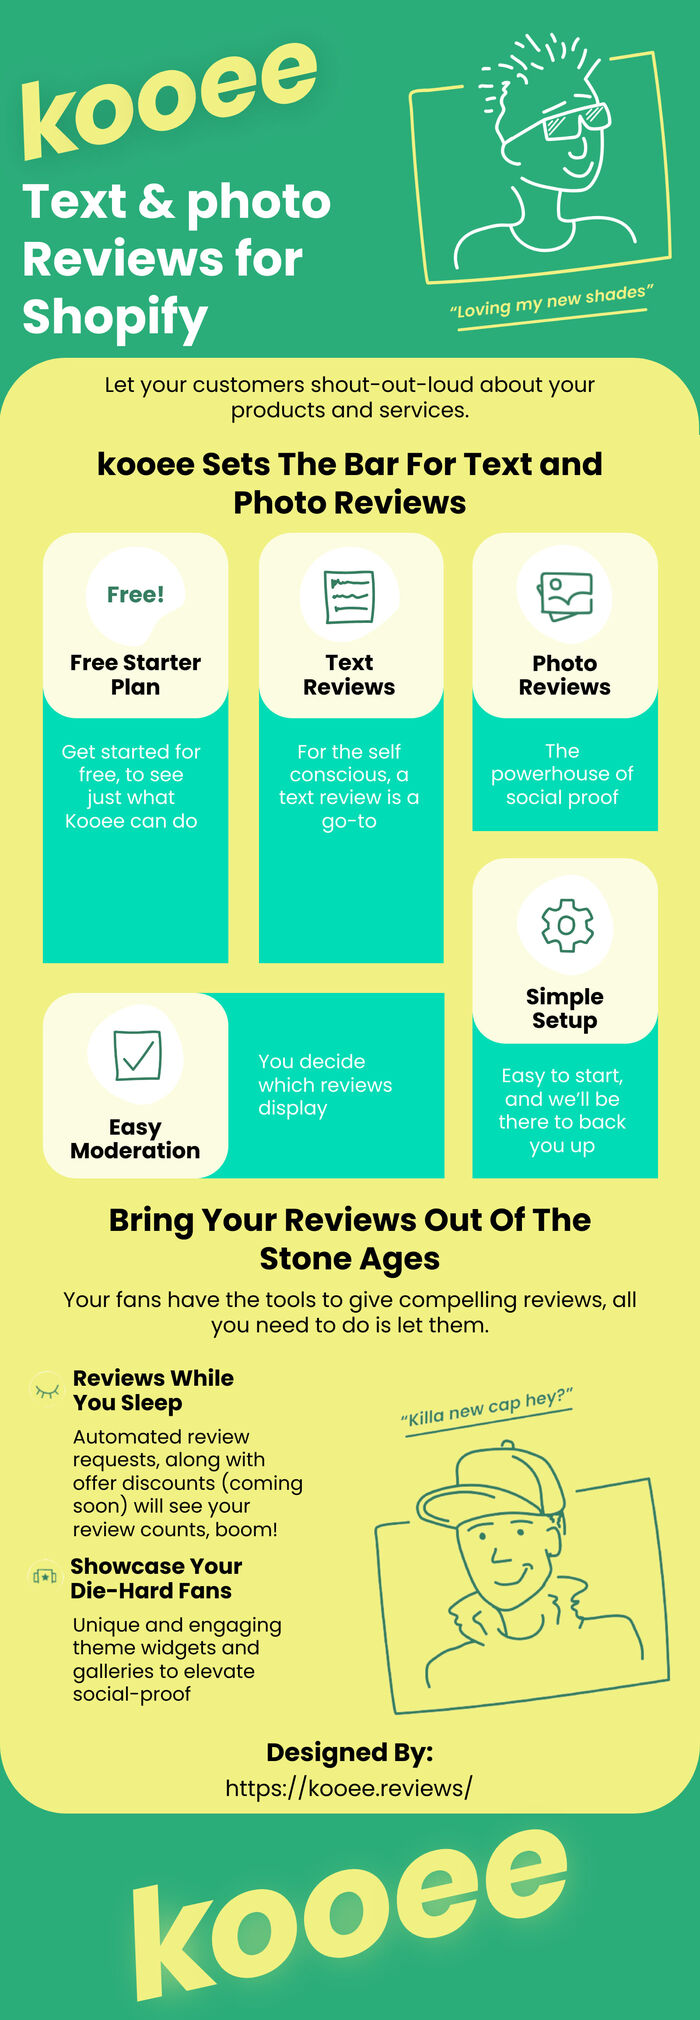 This Infographic is designed by Kooee Reviews